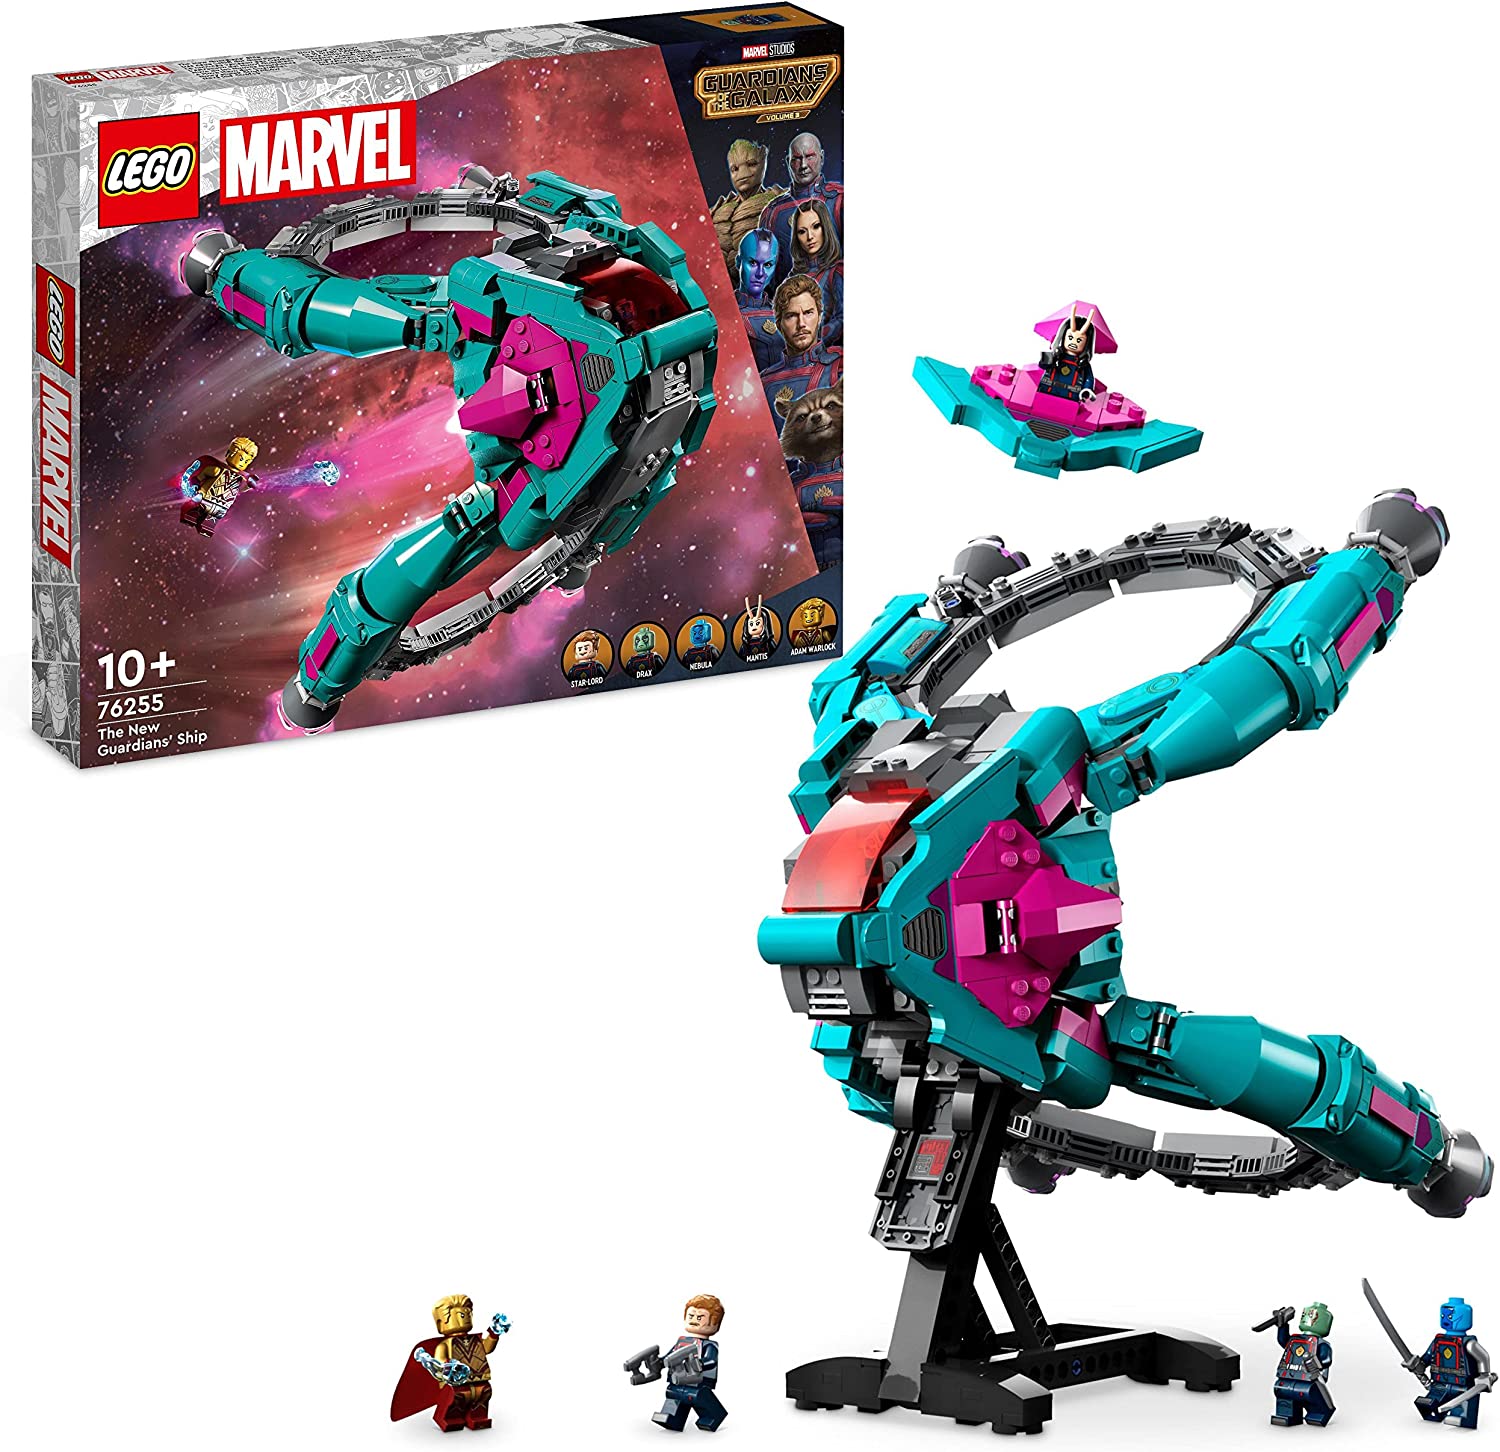 LEGO 76255 Marvel the New Ship of the Guardians of the Galaxy Volume 3 Build Toy With Mantis, Drax & Star Lord Mini Figures, Superhero Spaceship Set